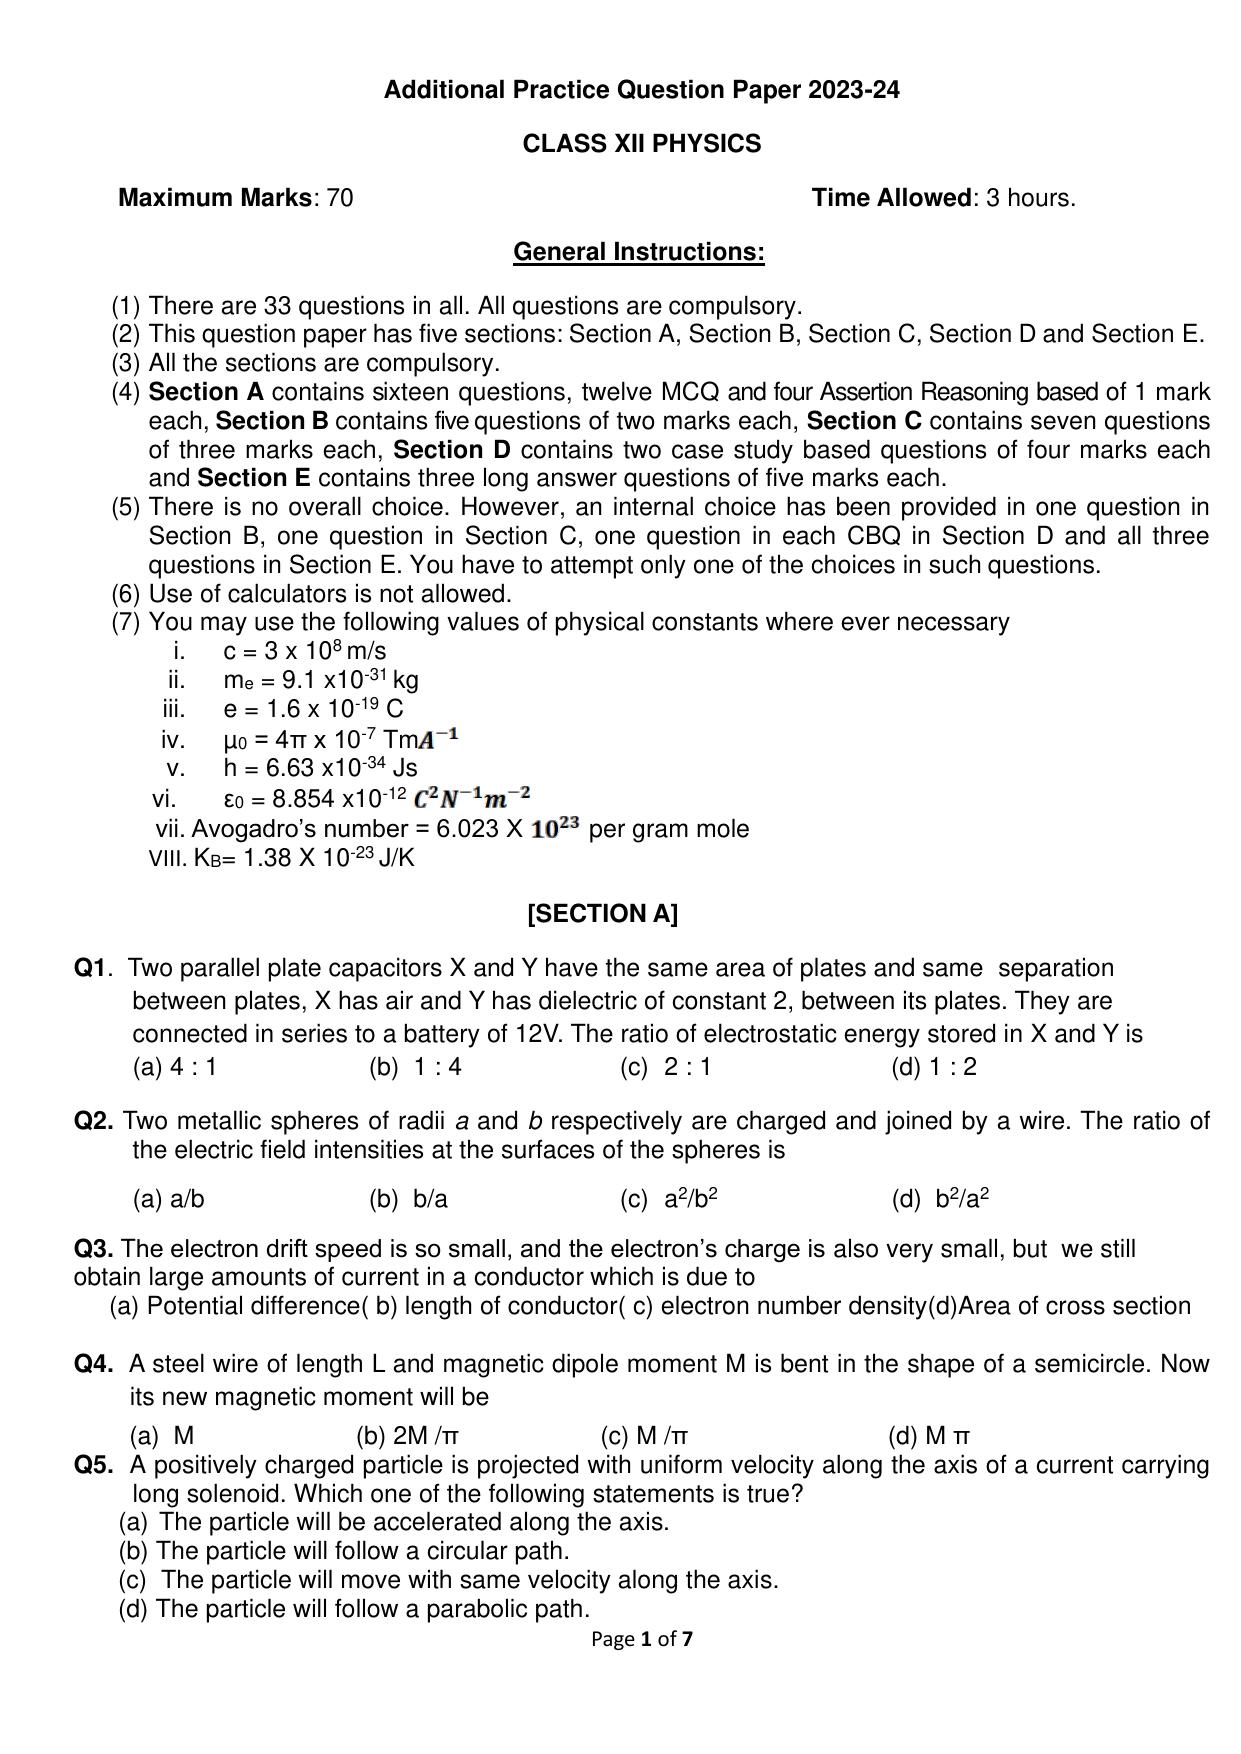 CBSE Class 12 Physics SET 2 Practice Questions 2023-24  - Page 1